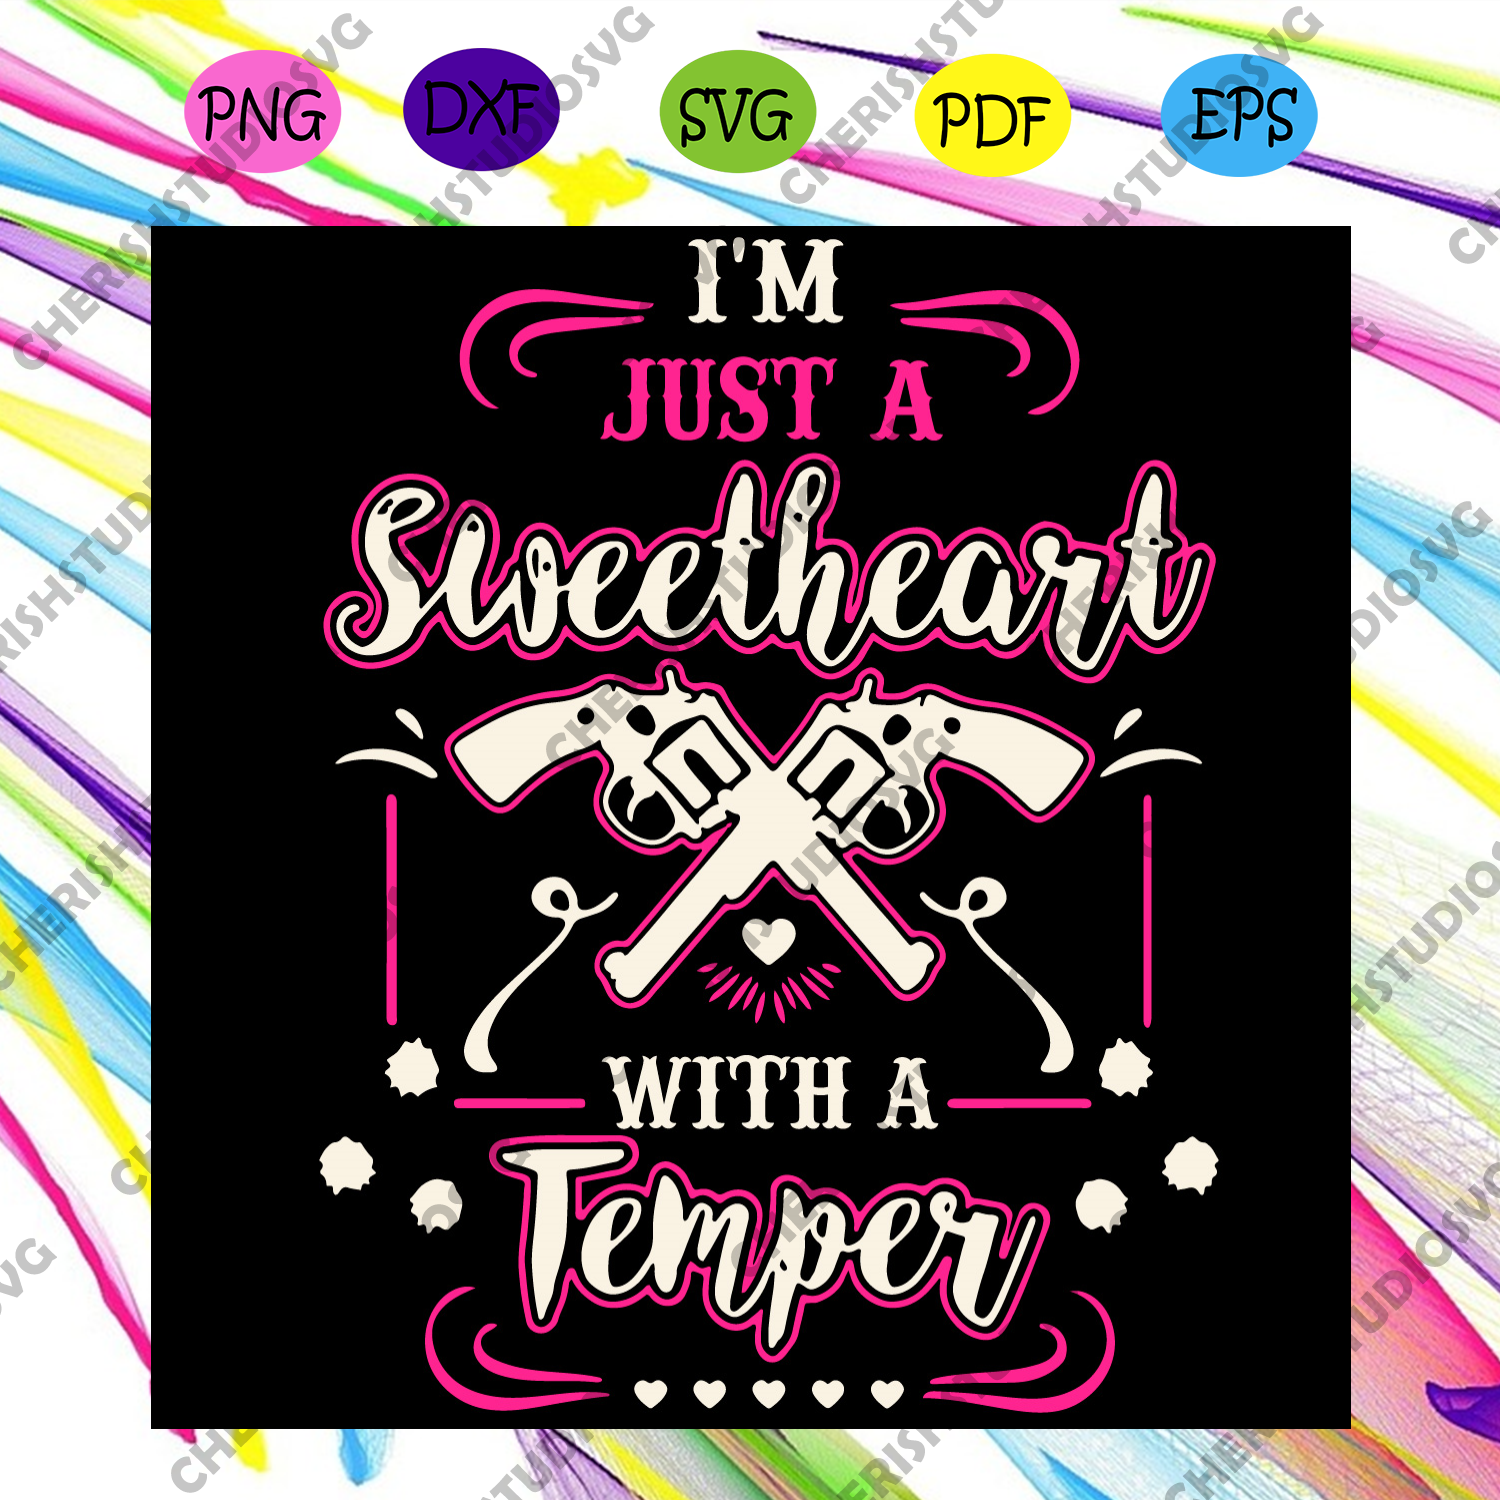 Download Im Just A Sweetheart With A Temper Svg Trending Svg Sweetheart Svg Cherishsvgstudio